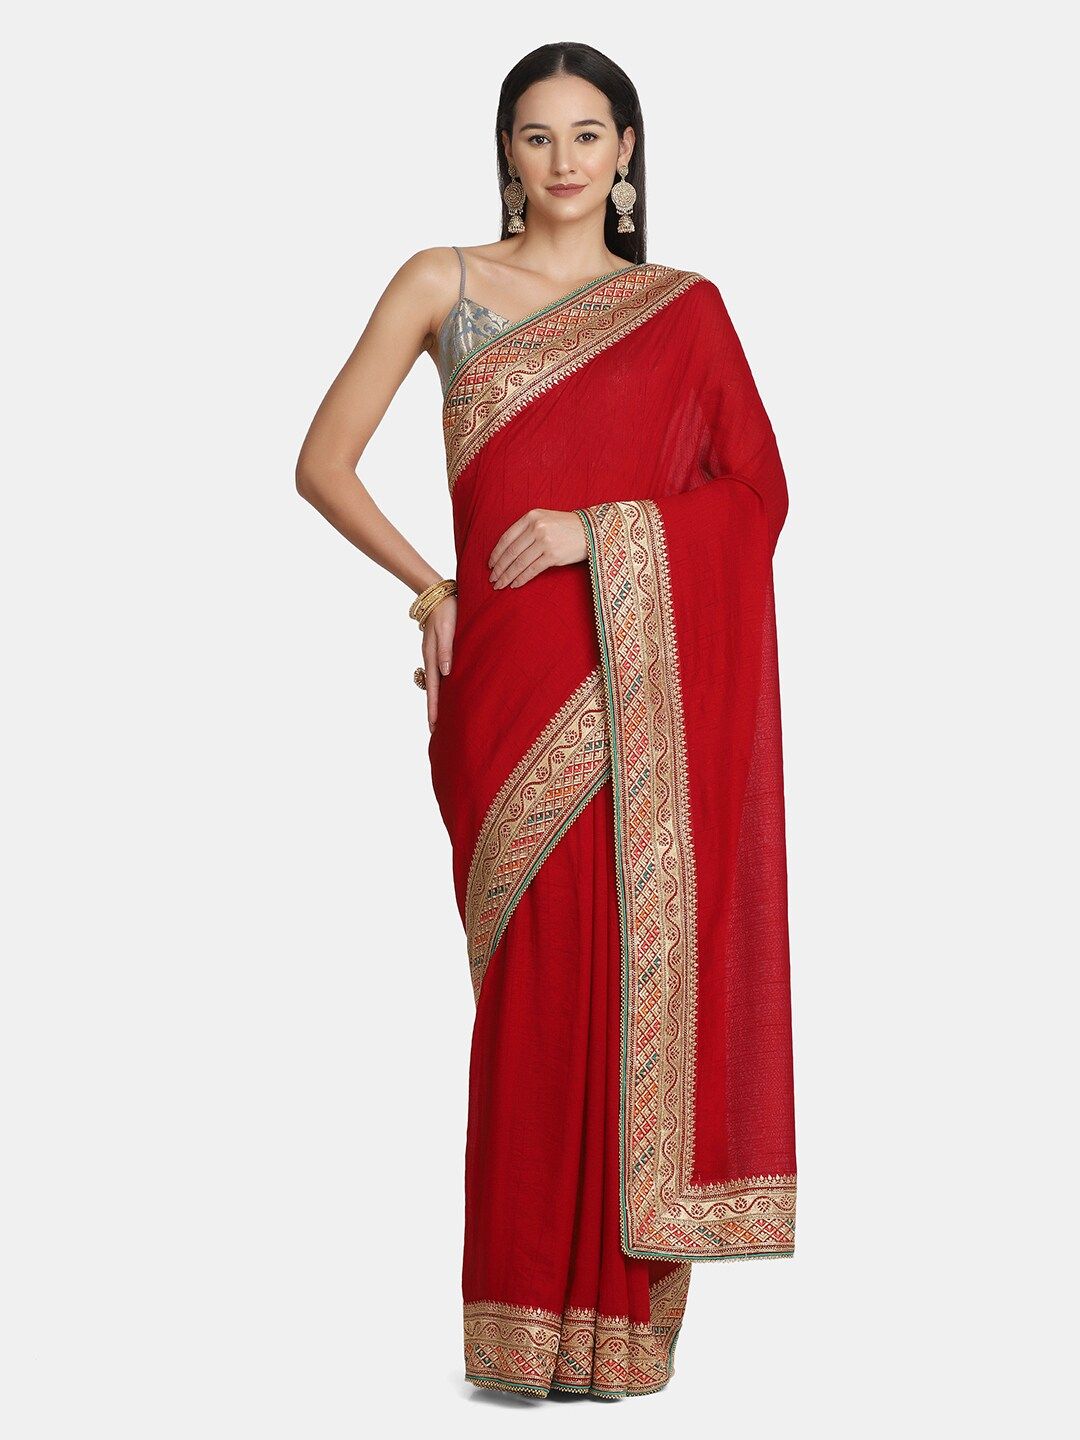 BOMBAY SELECTIONS Maroon Woven Design Art Silk Saree Price in India